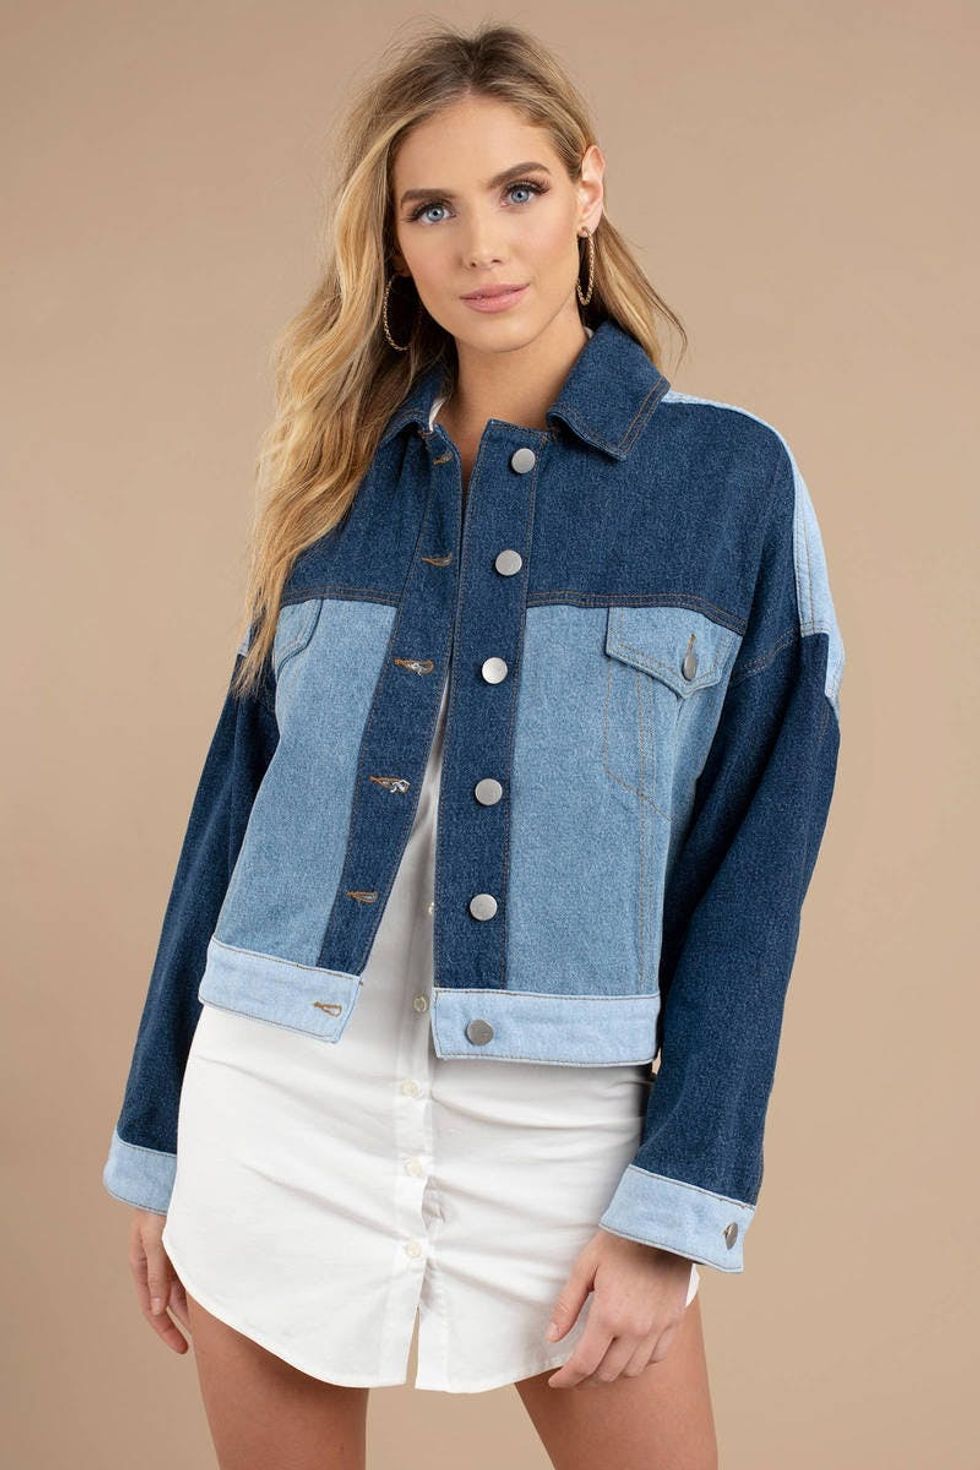 11 Far-From-Basic Denim Jackets to Wear This Fall - Brit + Co